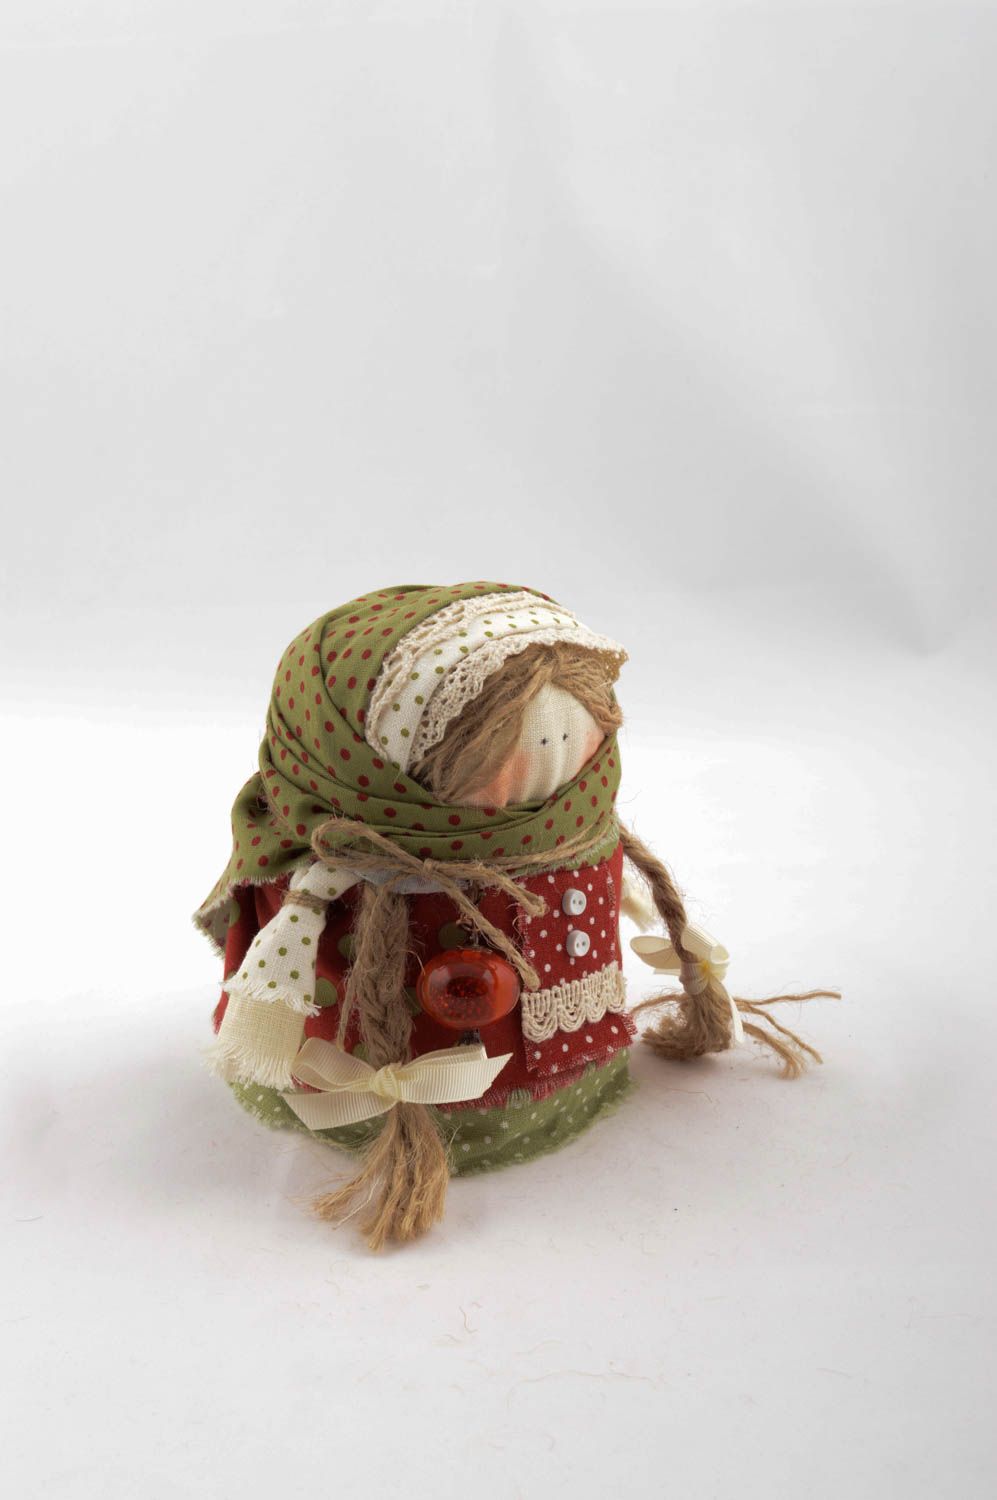 Handmade soft doll protective amulet home amulet rustic home decor unique gifts photo 3